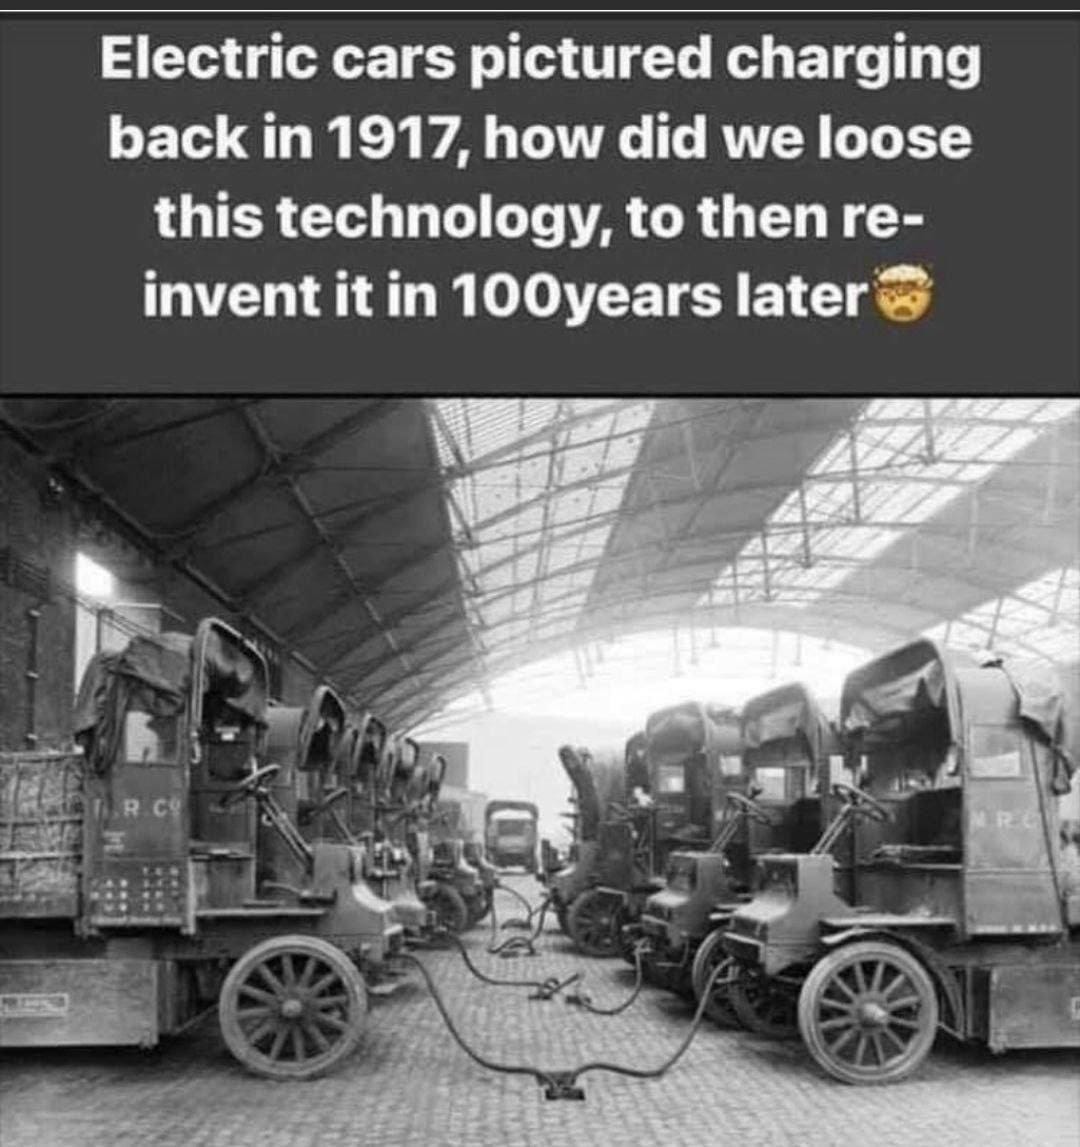 C:\Users\Estelle\Pictures\GAIA Tirannie\FULFORD IMAGES\electric-cars 1917.jpeg